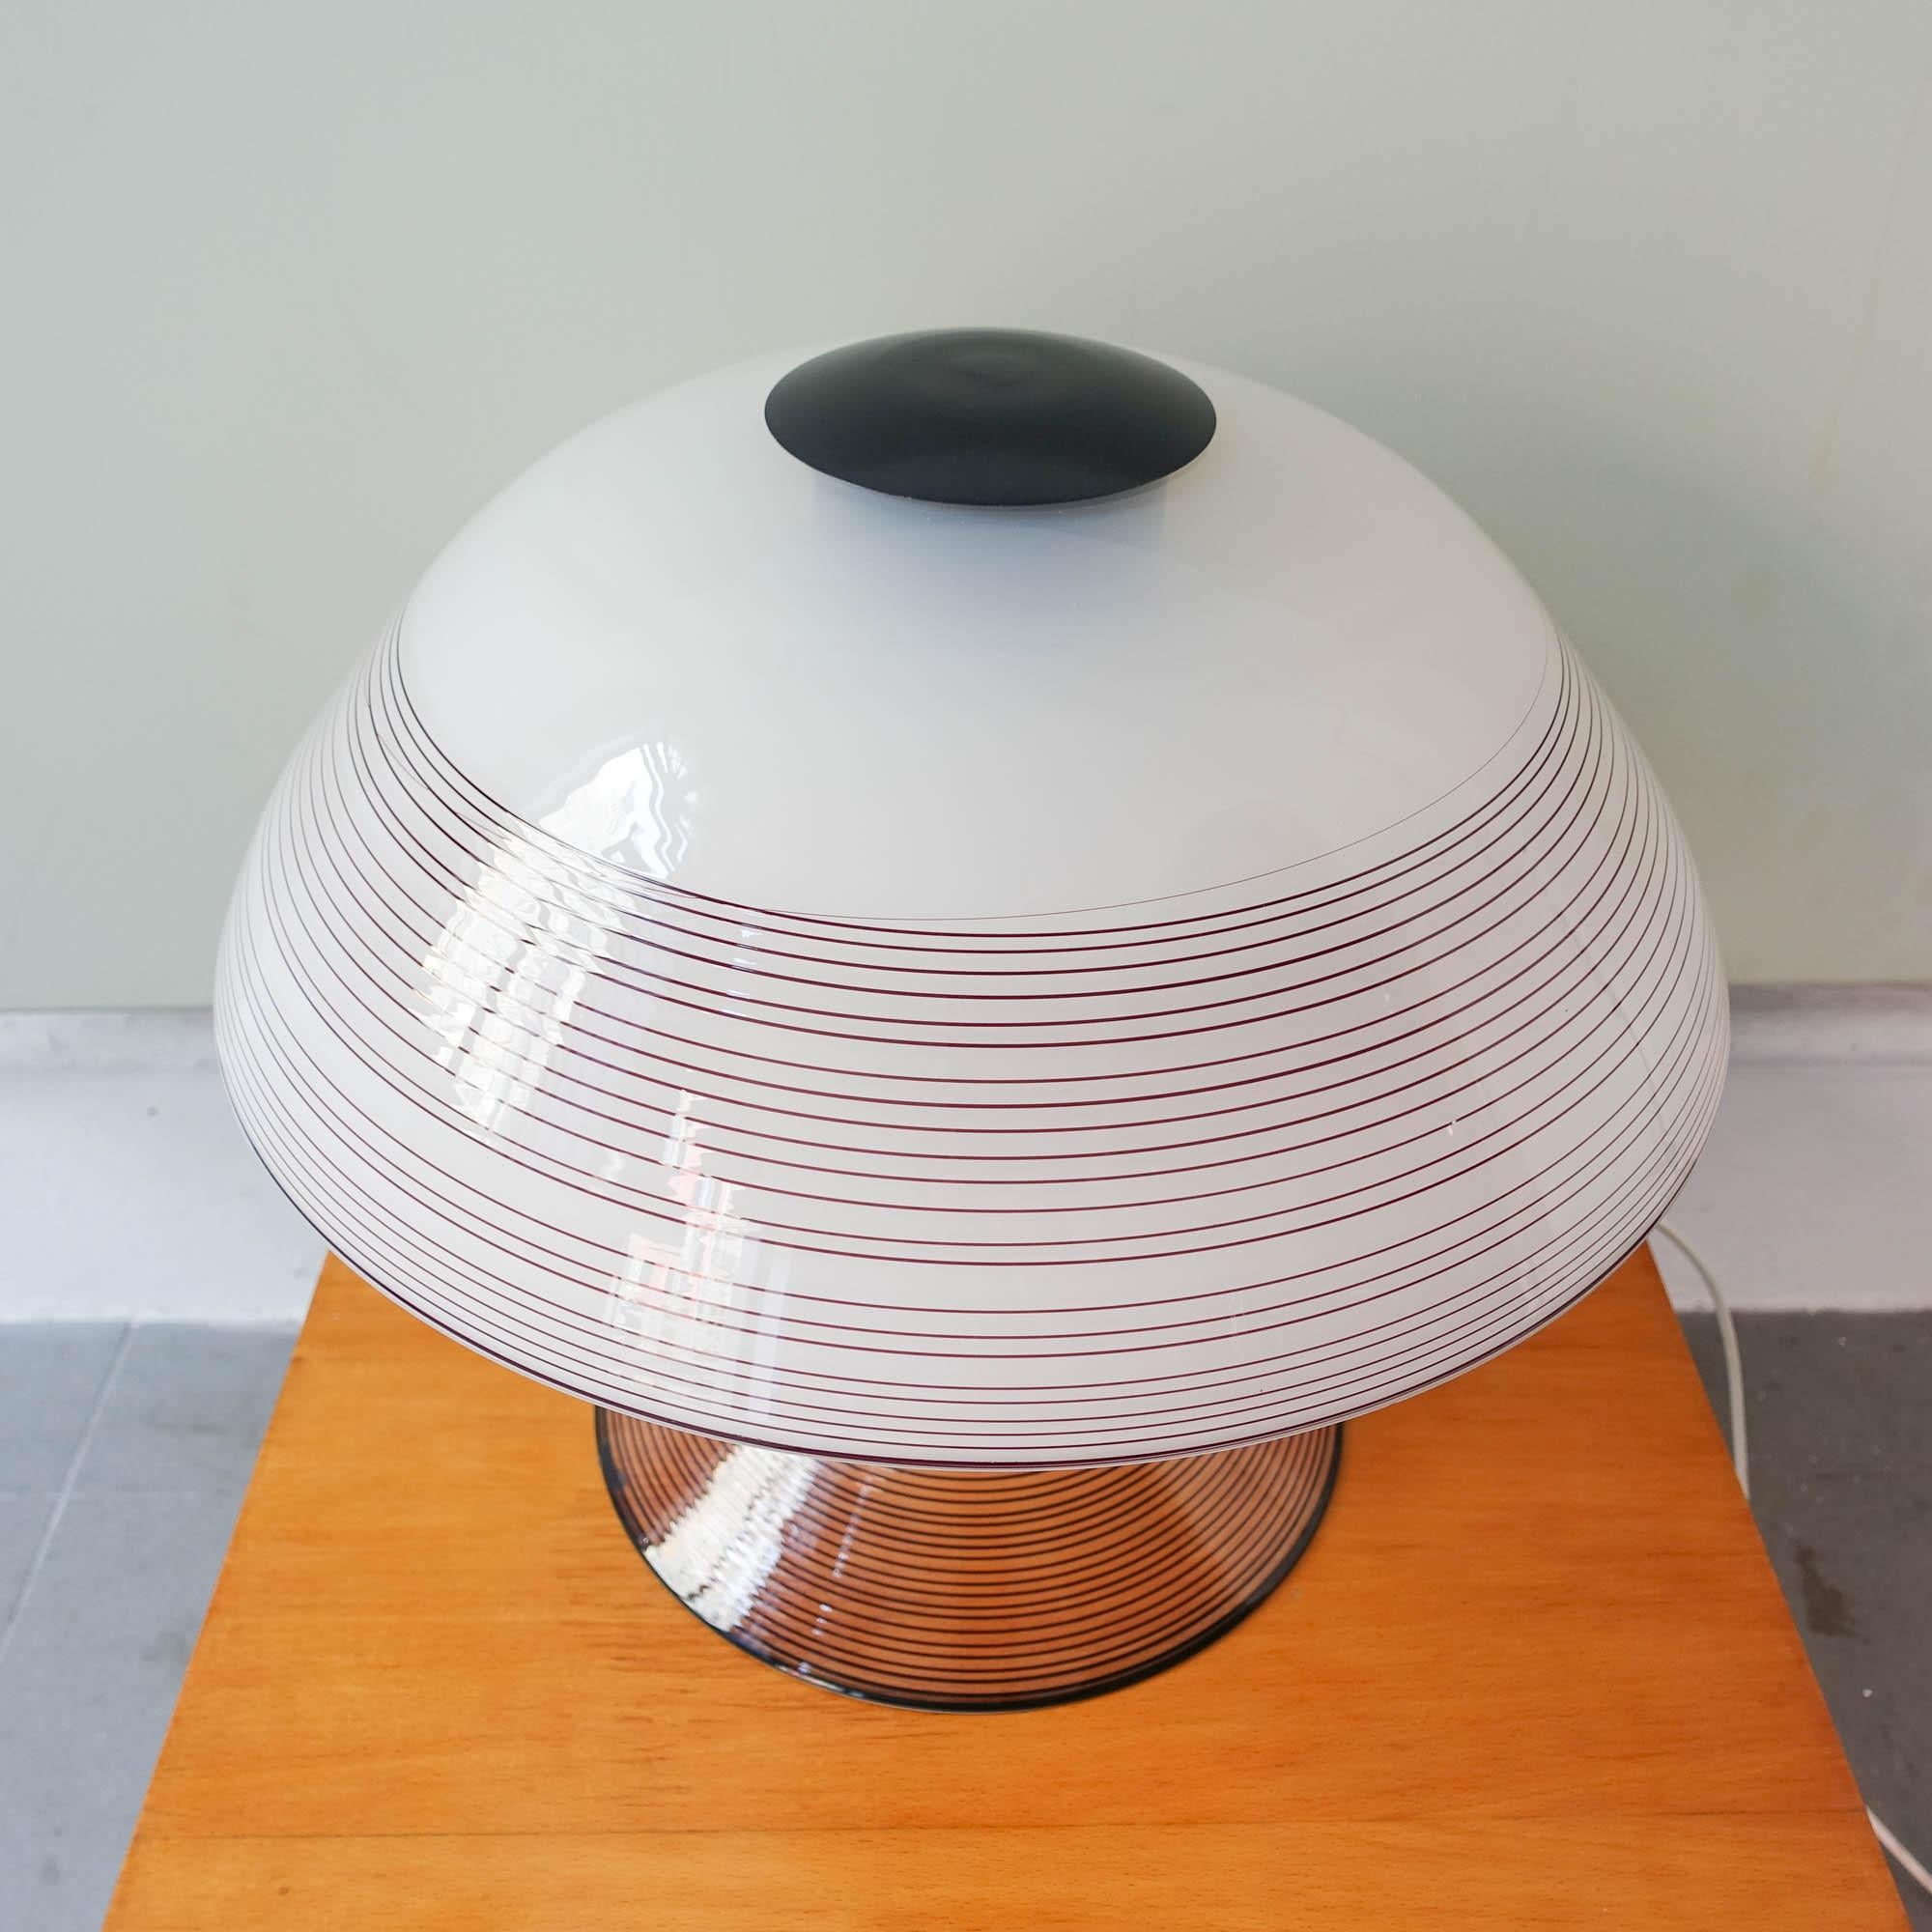 Black & White Murano Swirl Glass Table Lamp by Renato Toso for Leucos, 1970s For Sale 1